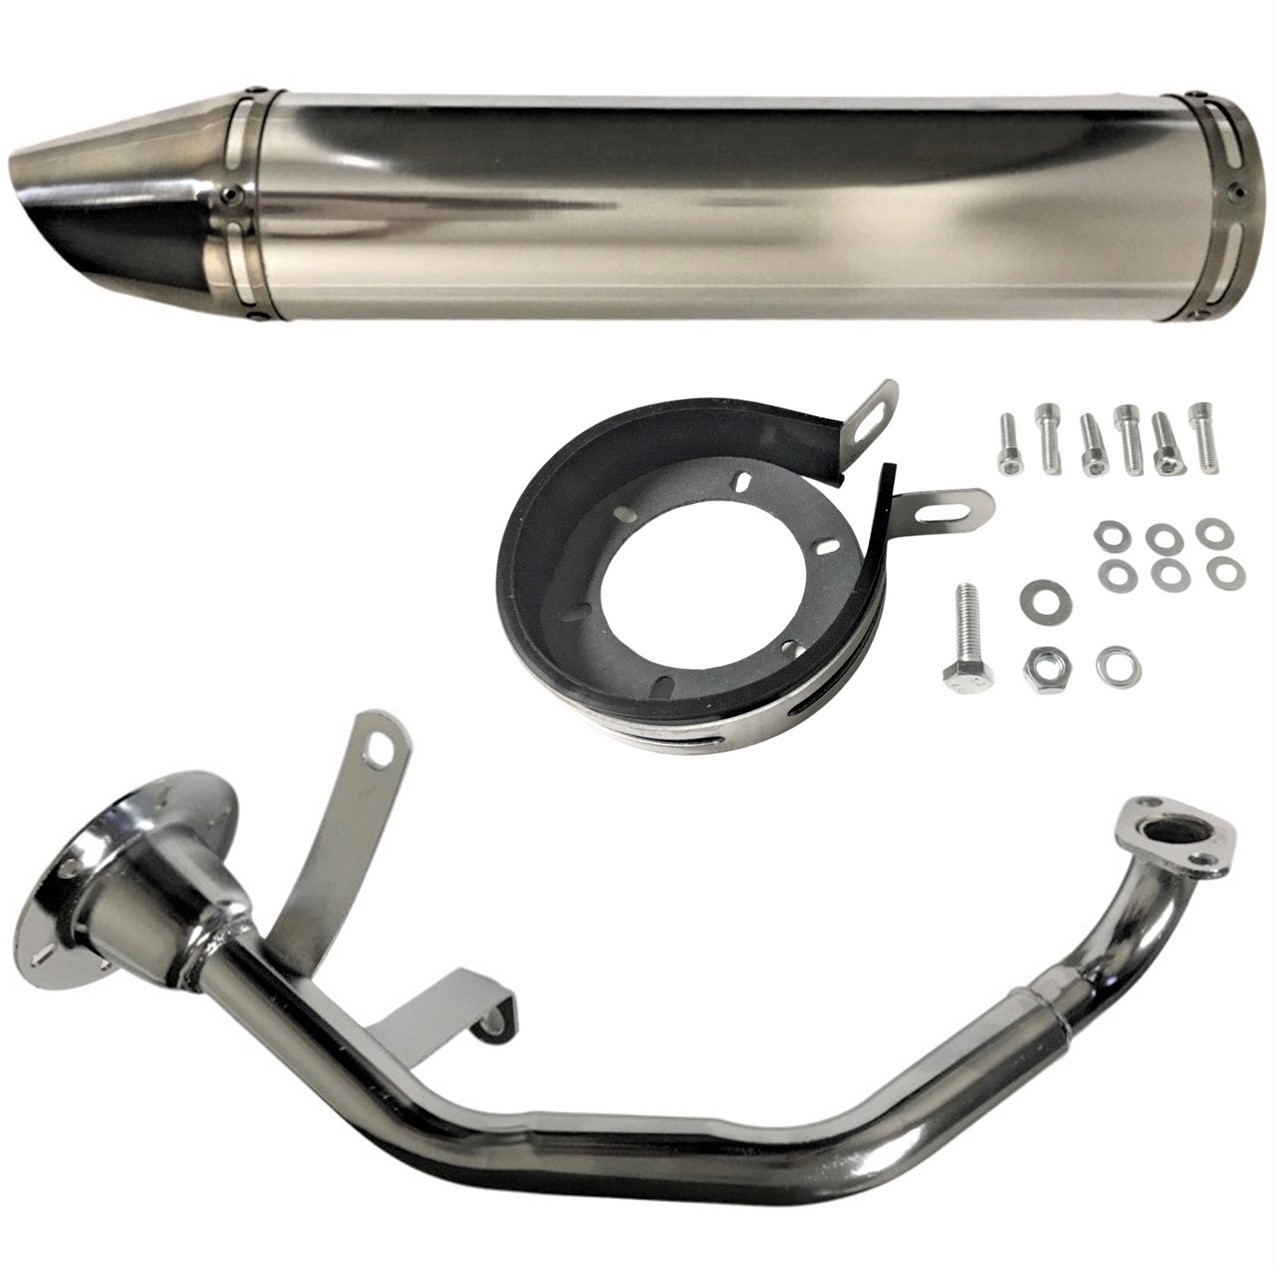 HIGH PERFORMANCE GY6-125, GY6-150 Chinese Scooters Exhaust Pipe